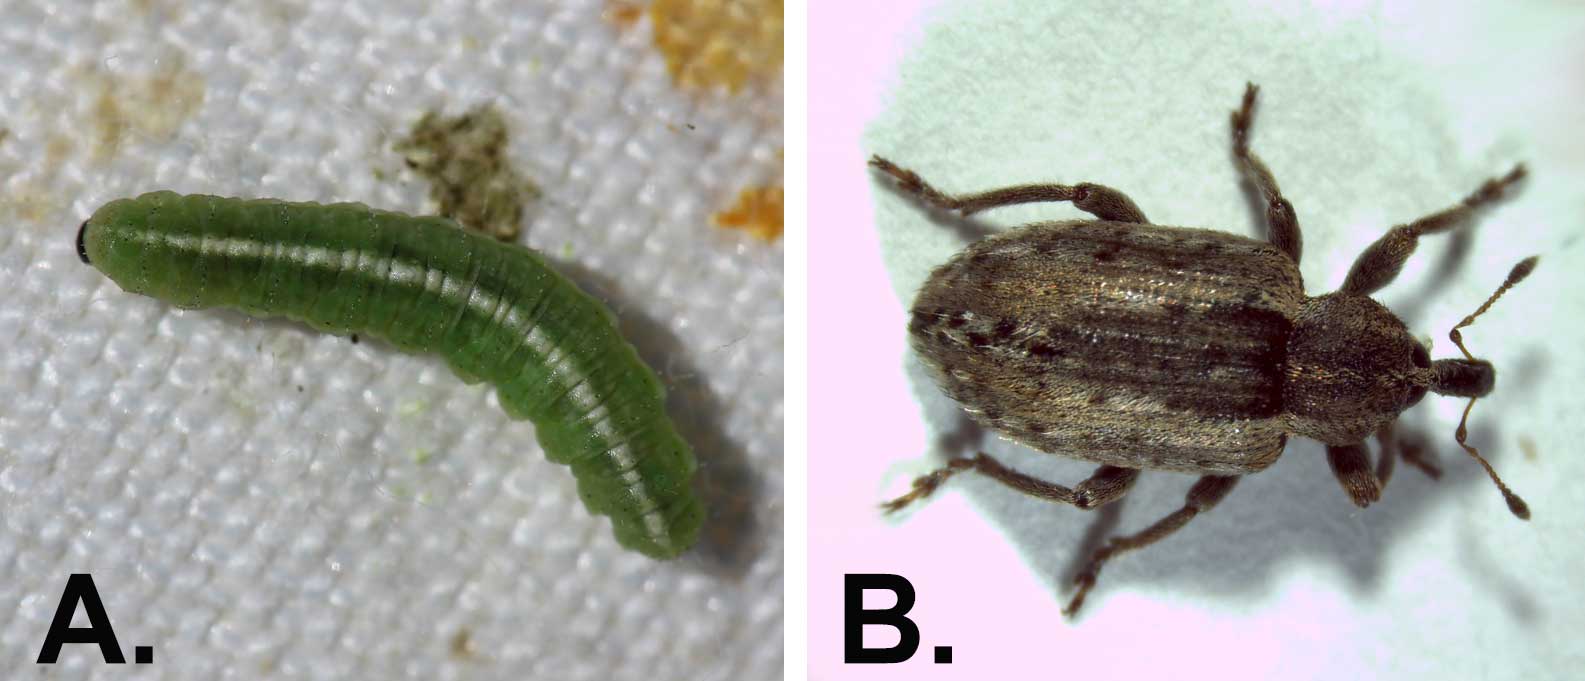 Two photos of alfalfa weevils during different lifecycle stages. The left "A," is the larva stage and has a longate, green larvae that looks like a caterpillar with white stripe running down the body and brown head. The right, "B," is the adult stage and pictures a brown beetle with long snout.